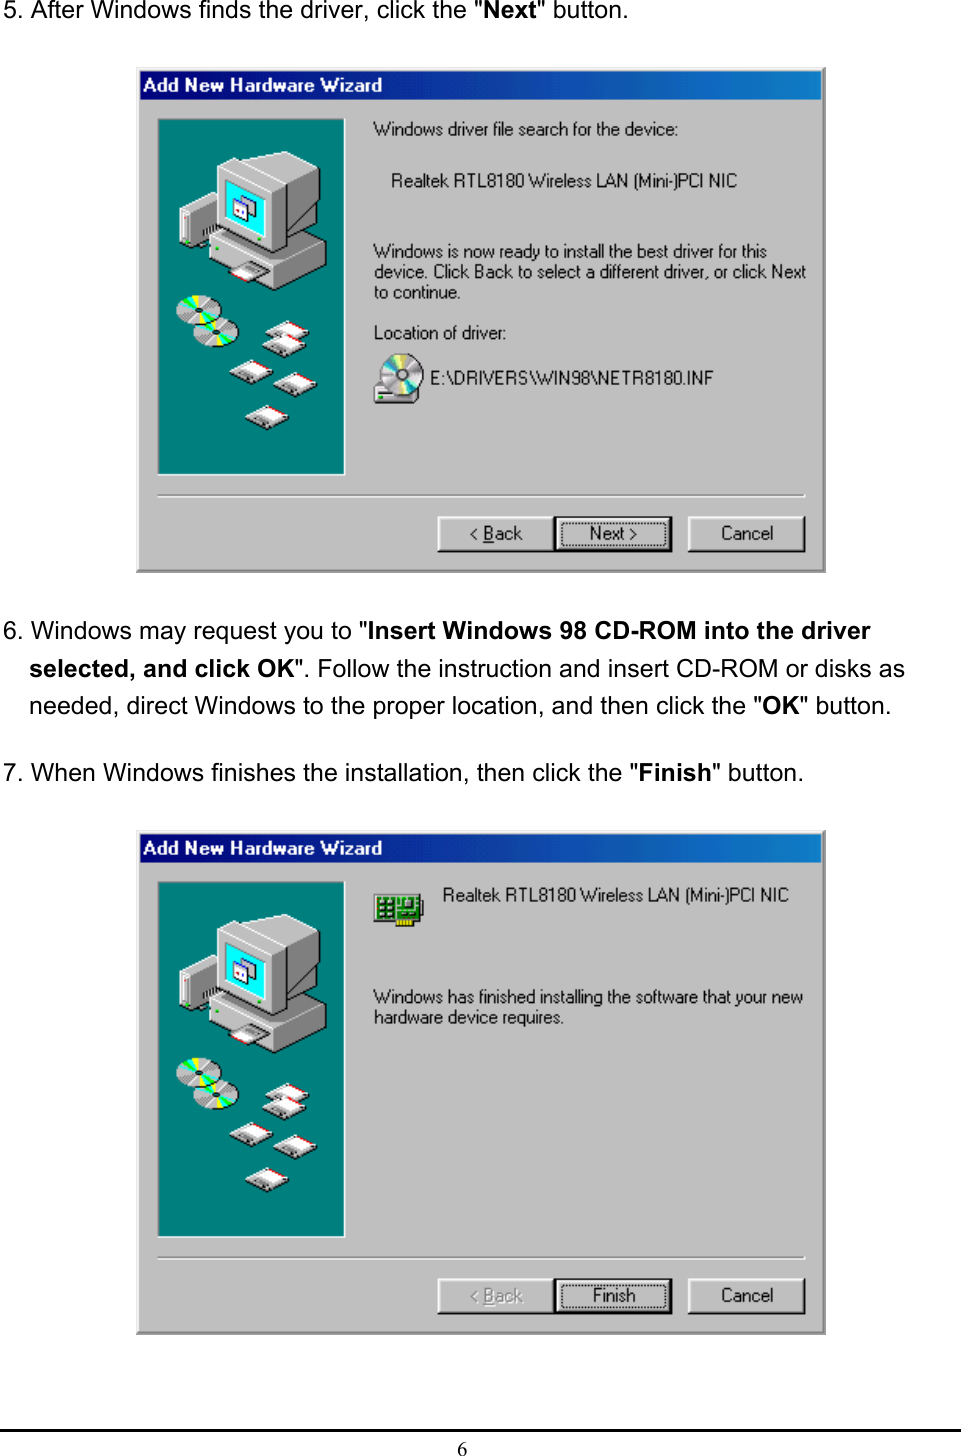  6  5. After Windows finds the driver, click the &quot;Next&quot; button.  6. Windows may request you to &quot;Insert Windows 98 CD-ROM into the driver selected, and click OK&quot;. Follow the instruction and insert CD-ROM or disks as needed, direct Windows to the proper location, and then click the &quot;OK&quot; button. 7. When Windows finishes the installation, then click the &quot;Finish&quot; button.  